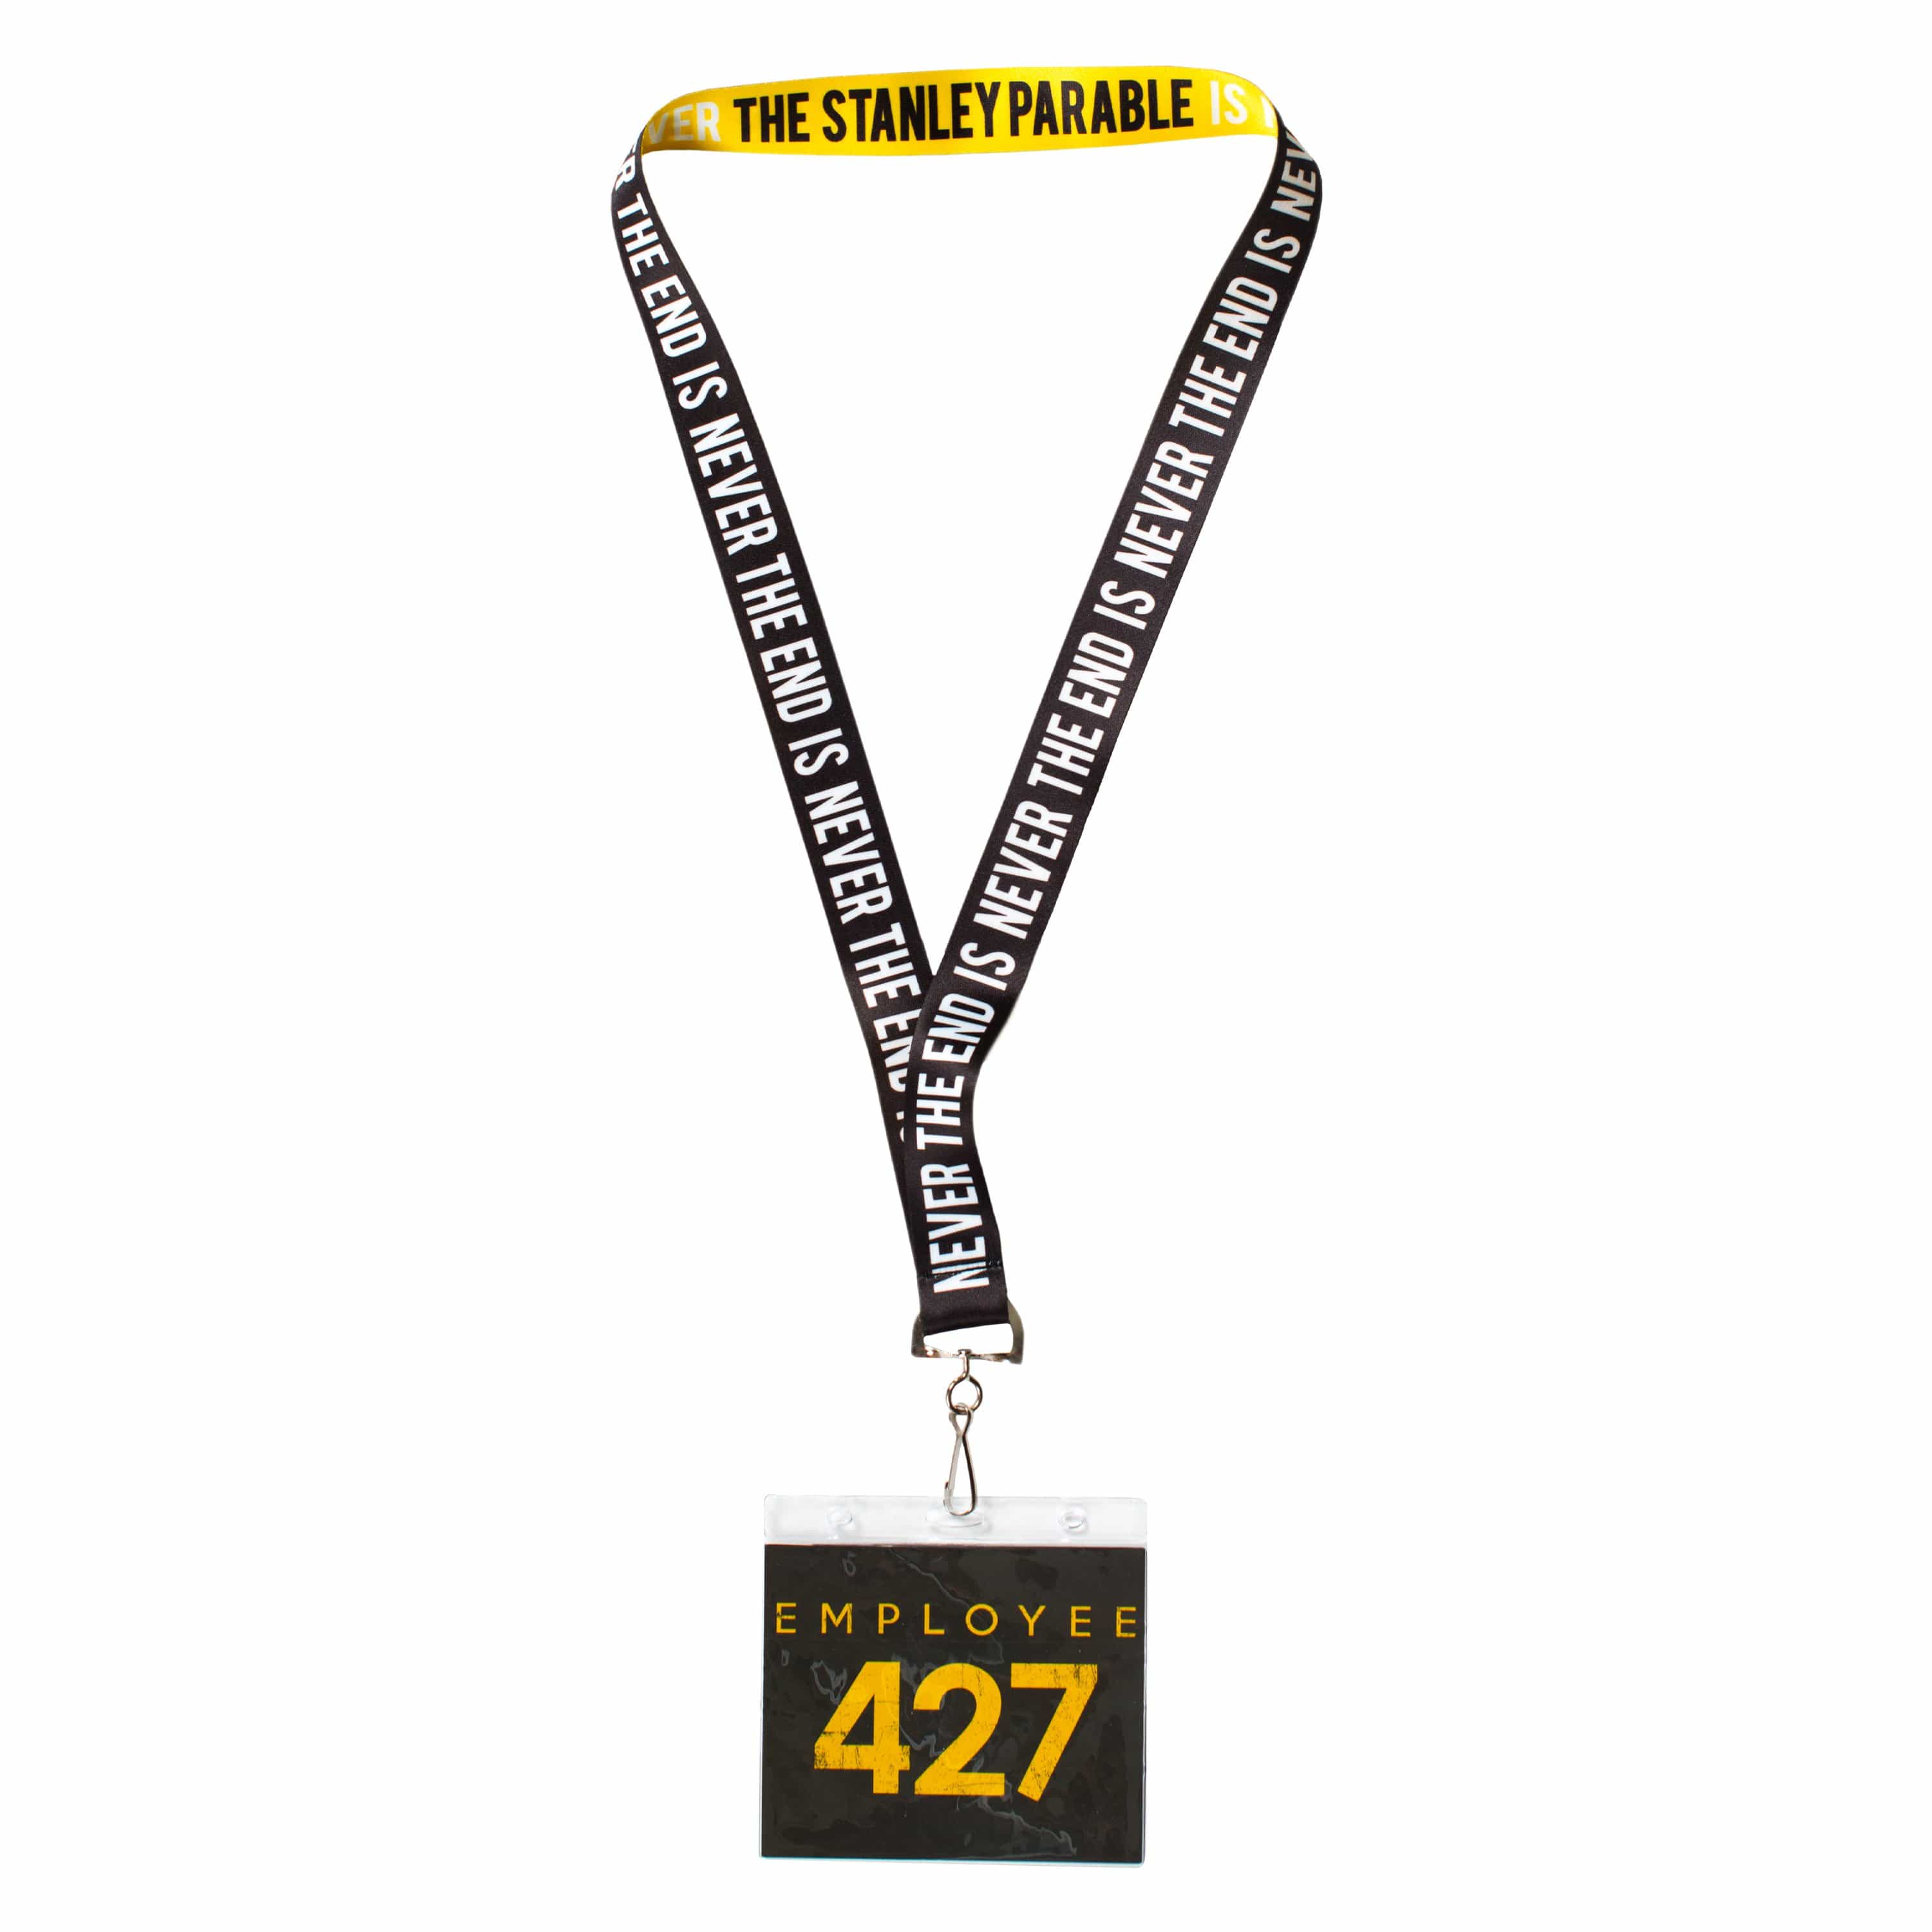 The Stanley Parable - Employee 427 Lanyard